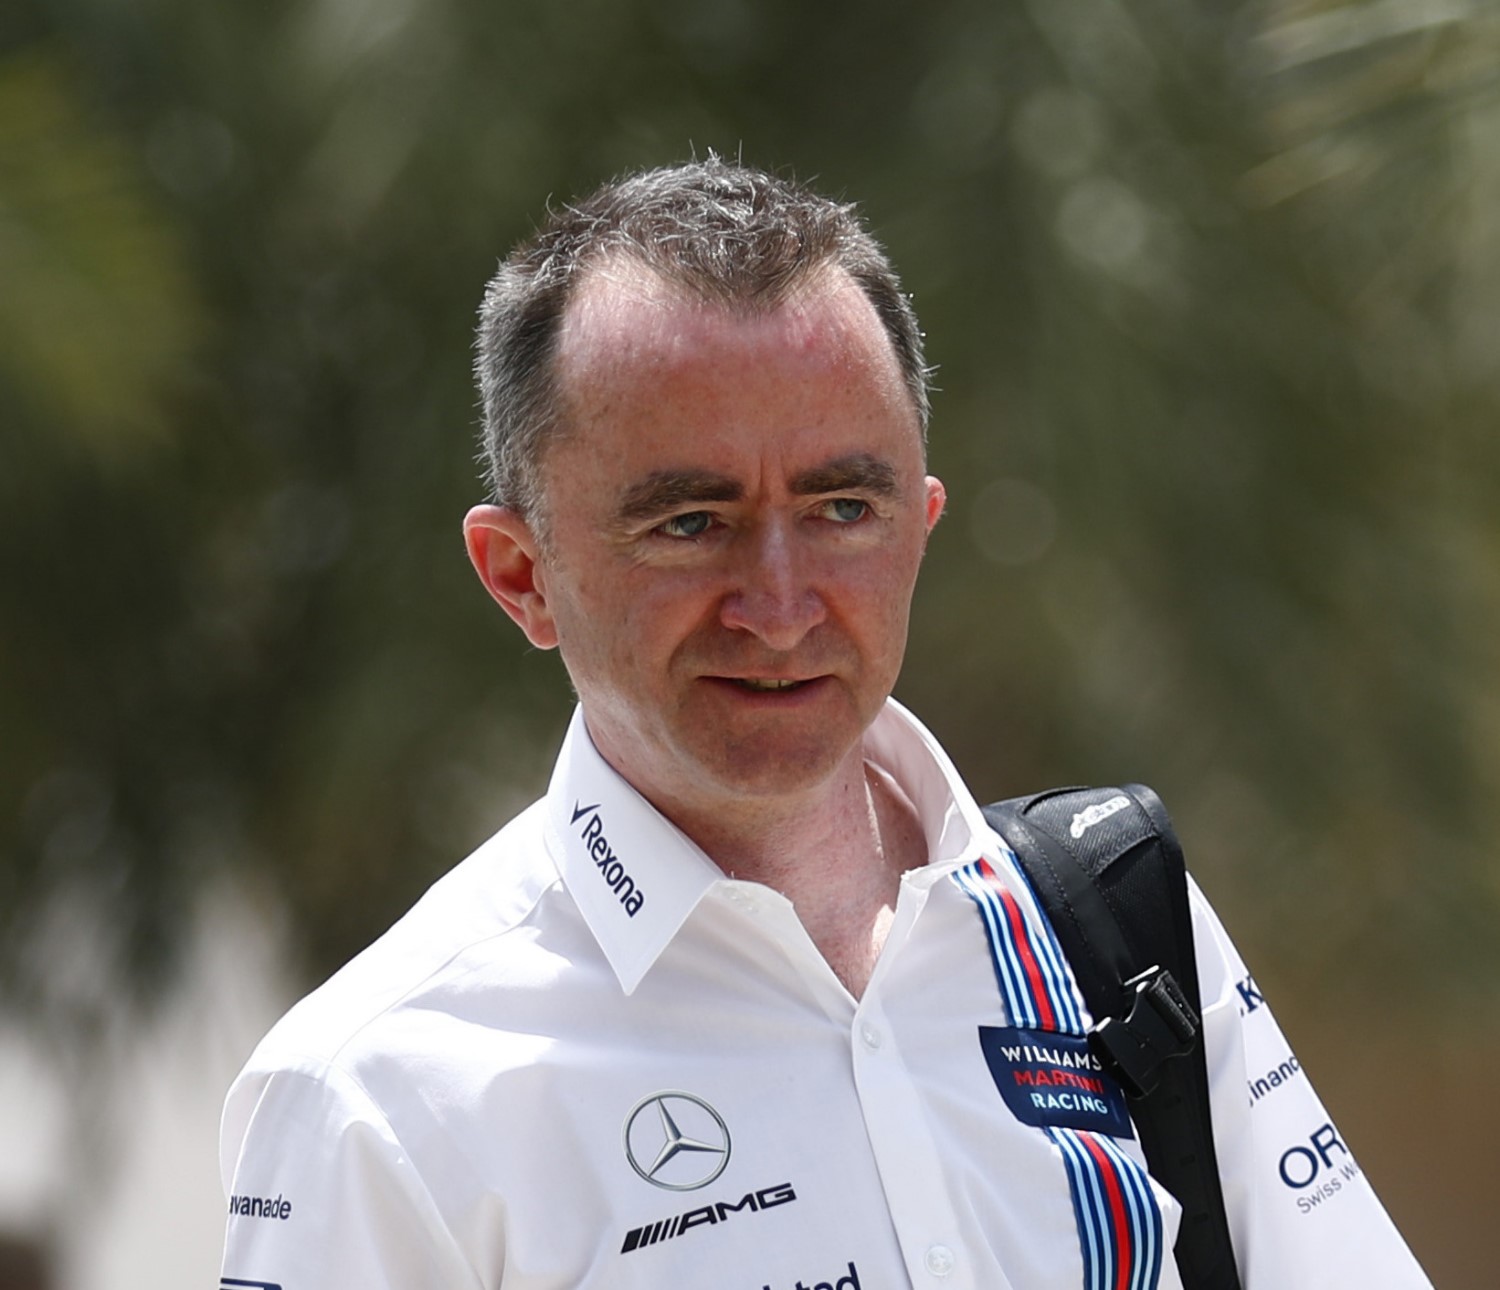 Paddy Lowe and the crew he assembled produced a colossal flop of a car